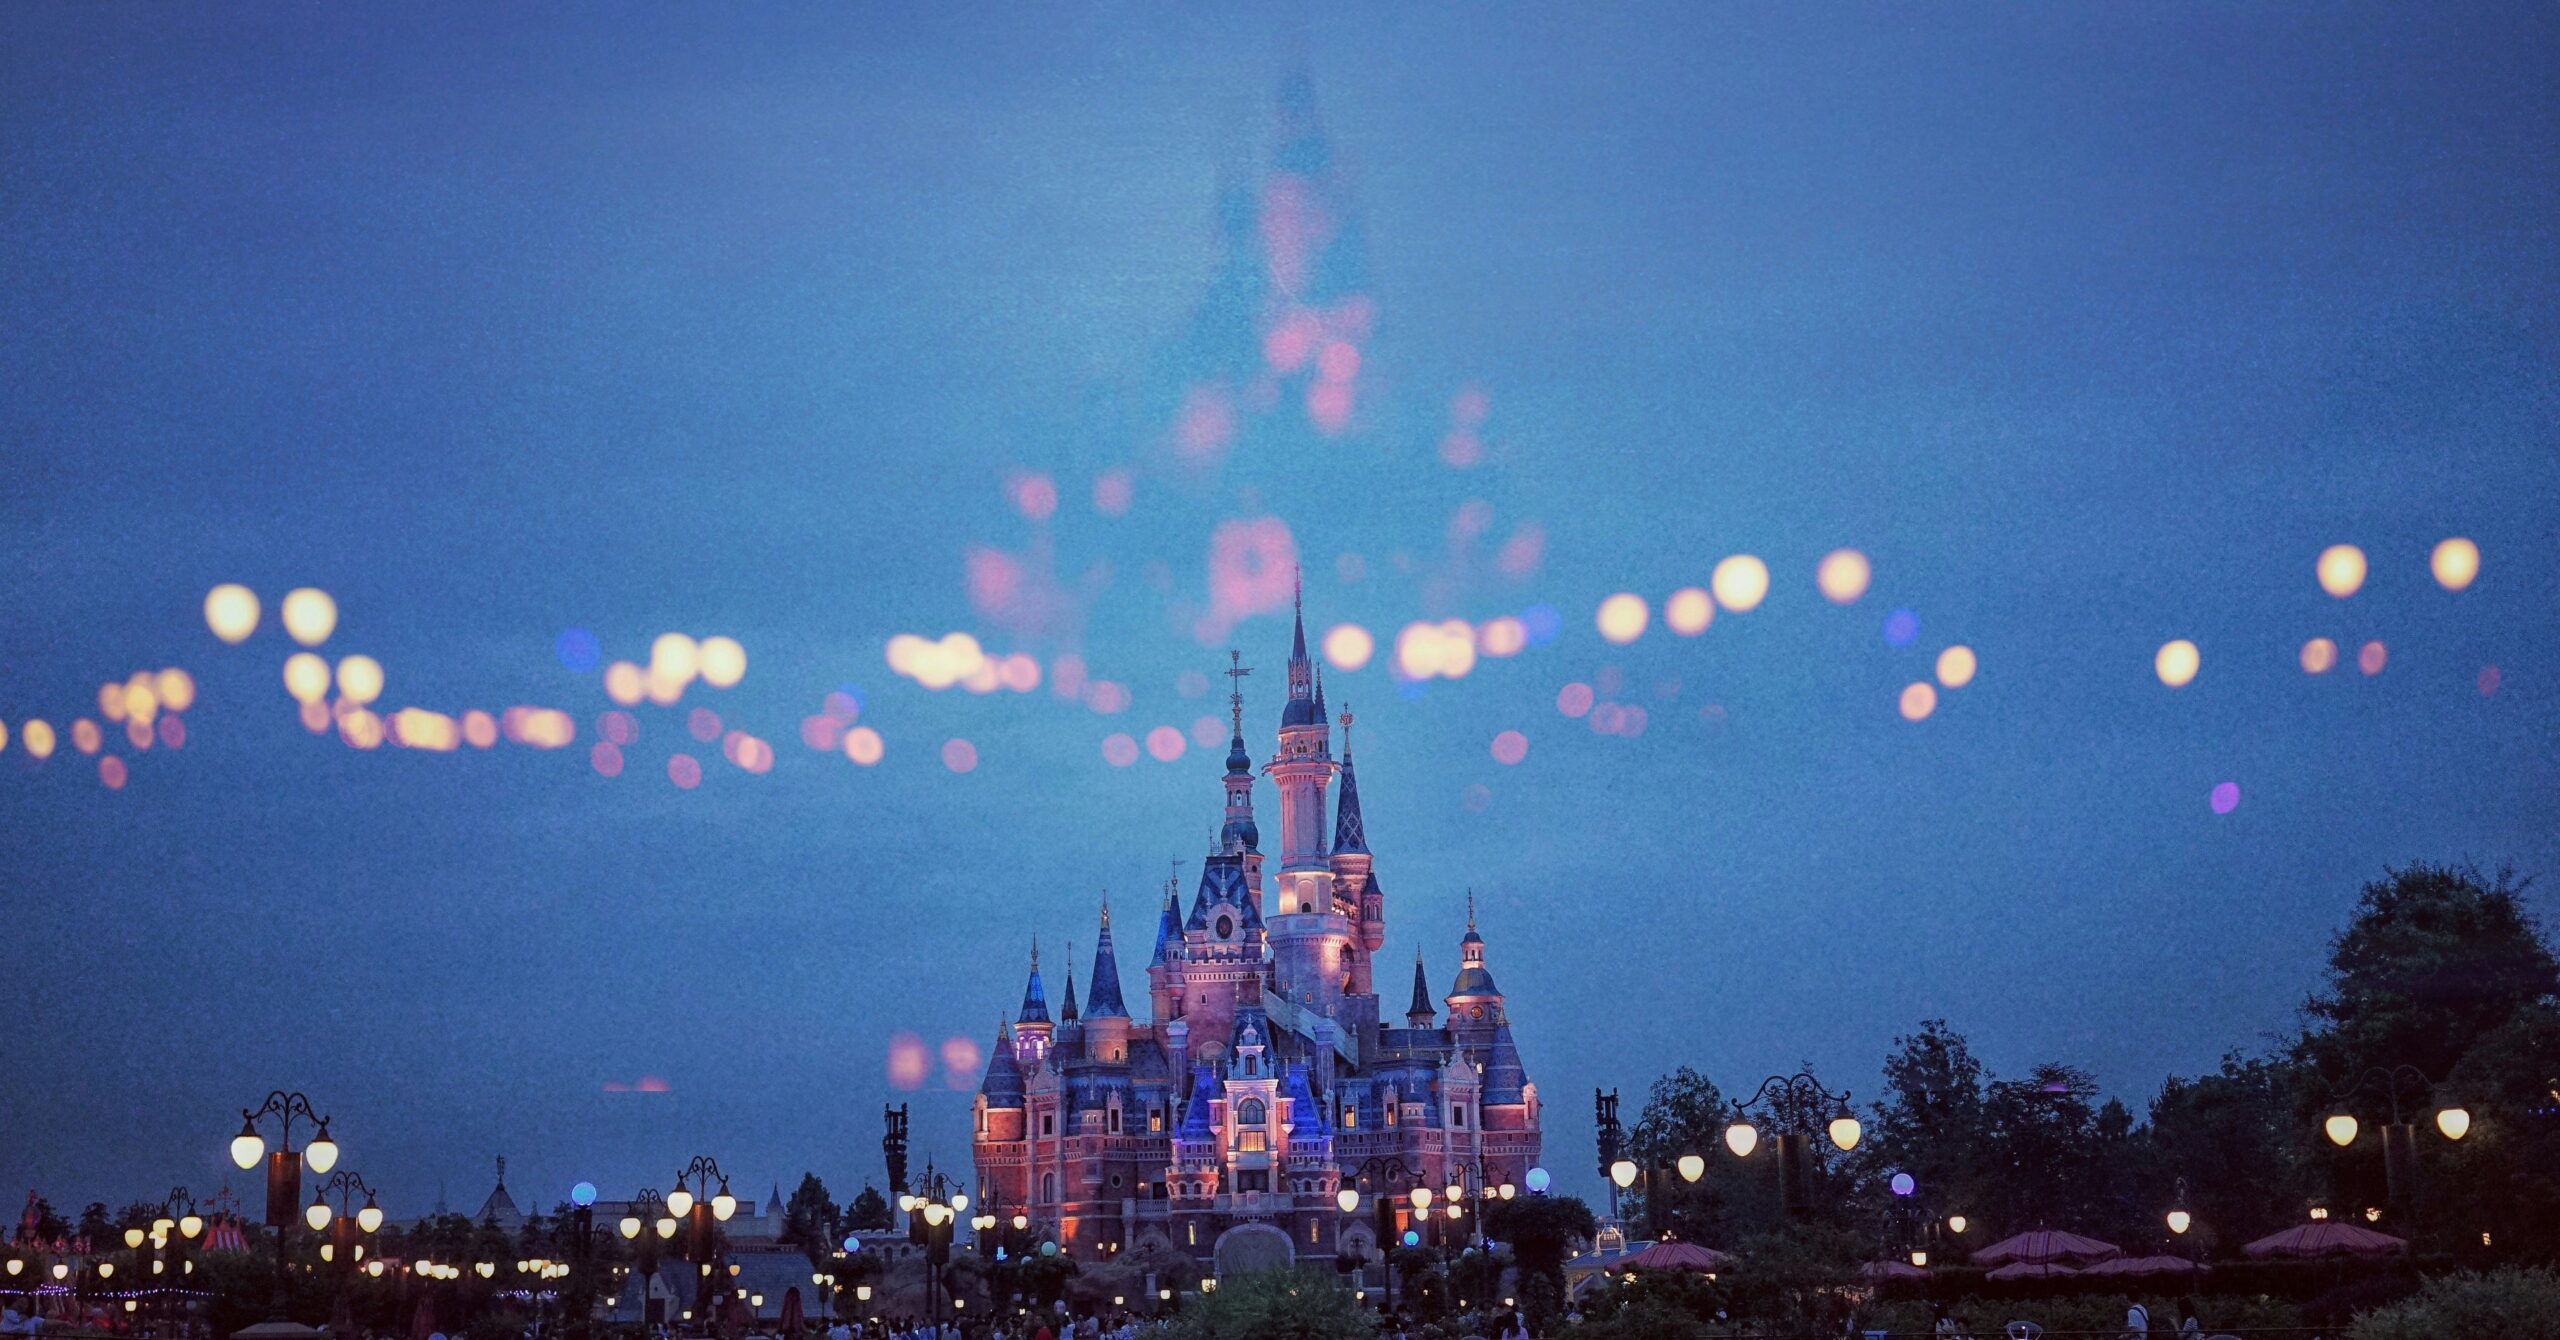 Check out how lying on the Disney DAS application can lead to a lifetime ban. Pictured: a Disney park with city lights in the background